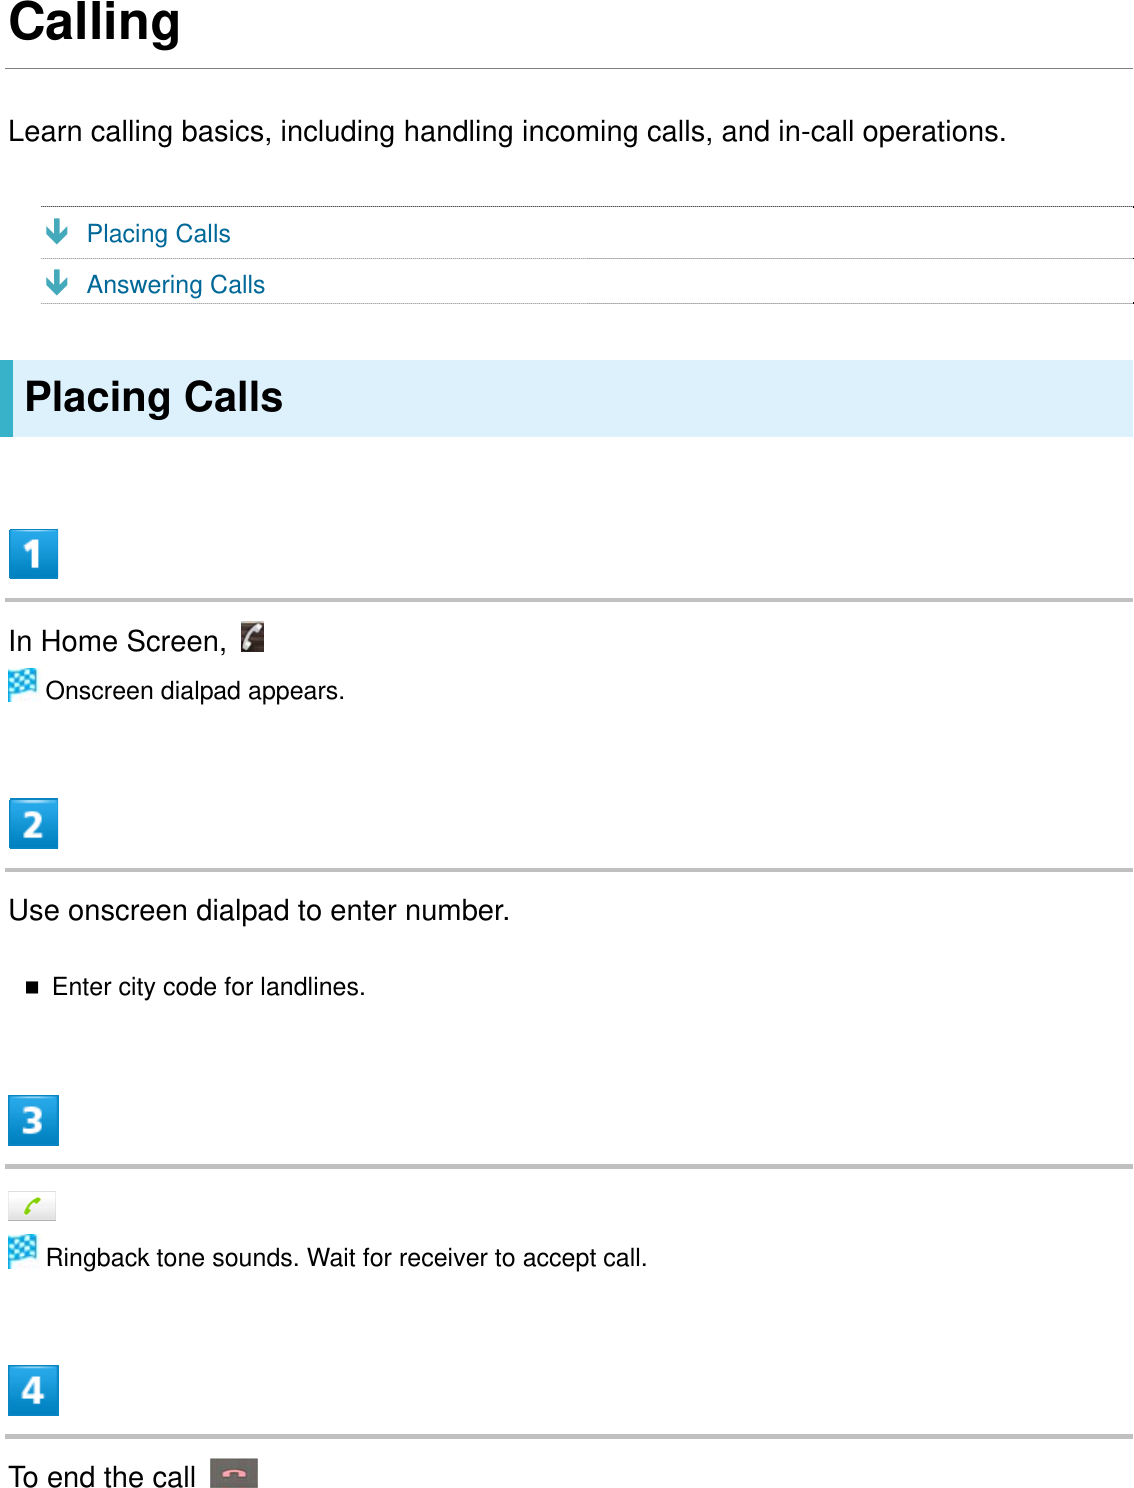 Calling Learn calling basics, including handling incoming calls, and in-call operations.   Ð Placing Calls Ð Answering Calls Placing Calls  In Home Screen,    Onscreen dialpad appears.  Use onscreen dialpad to enter number.  Enter city code for landlines.    Ringback tone sounds. Wait for receiver to accept call.  To end the call   